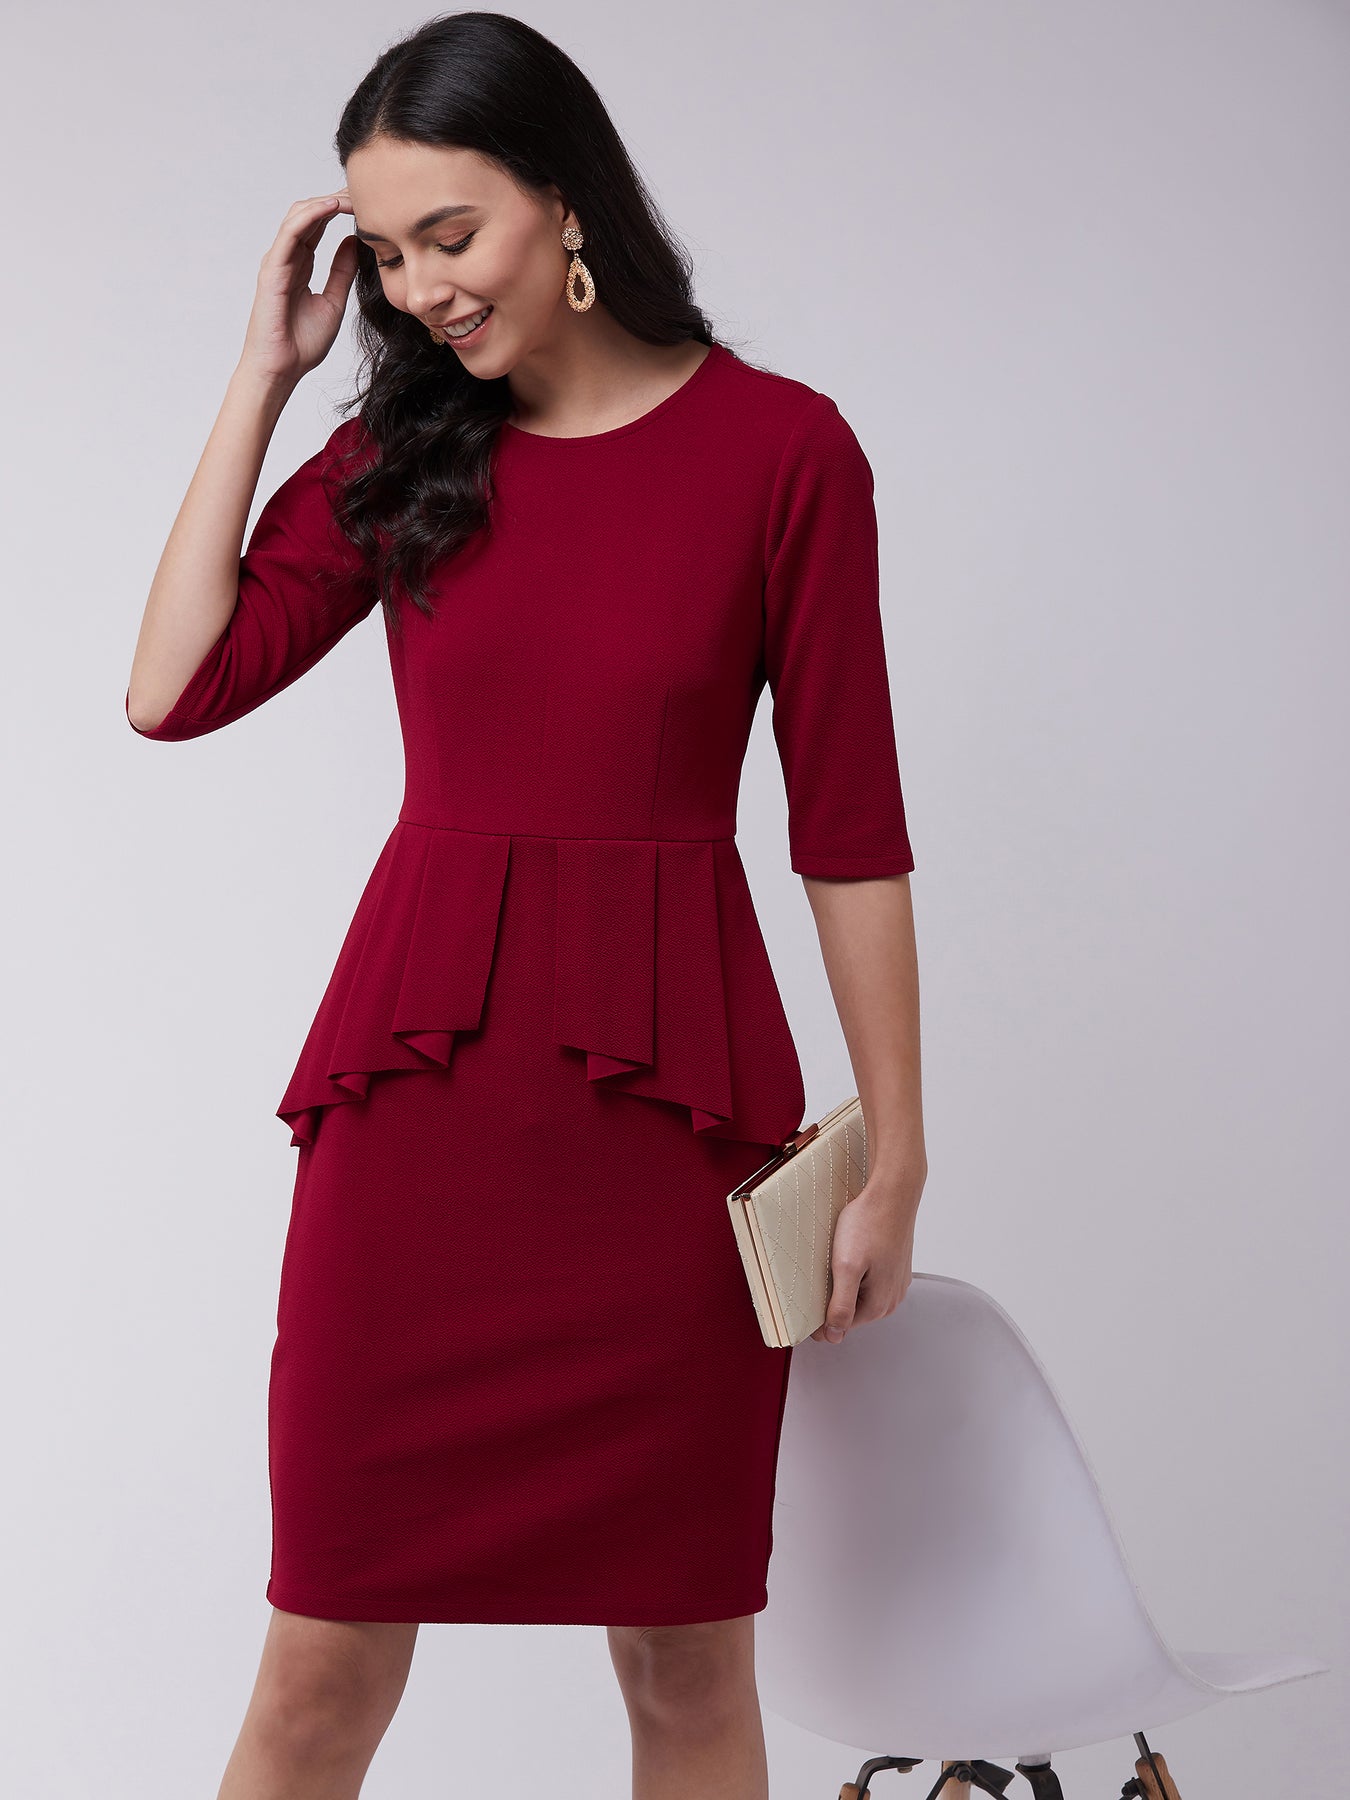 Solid Peplum Fitted Dress – Pannkh